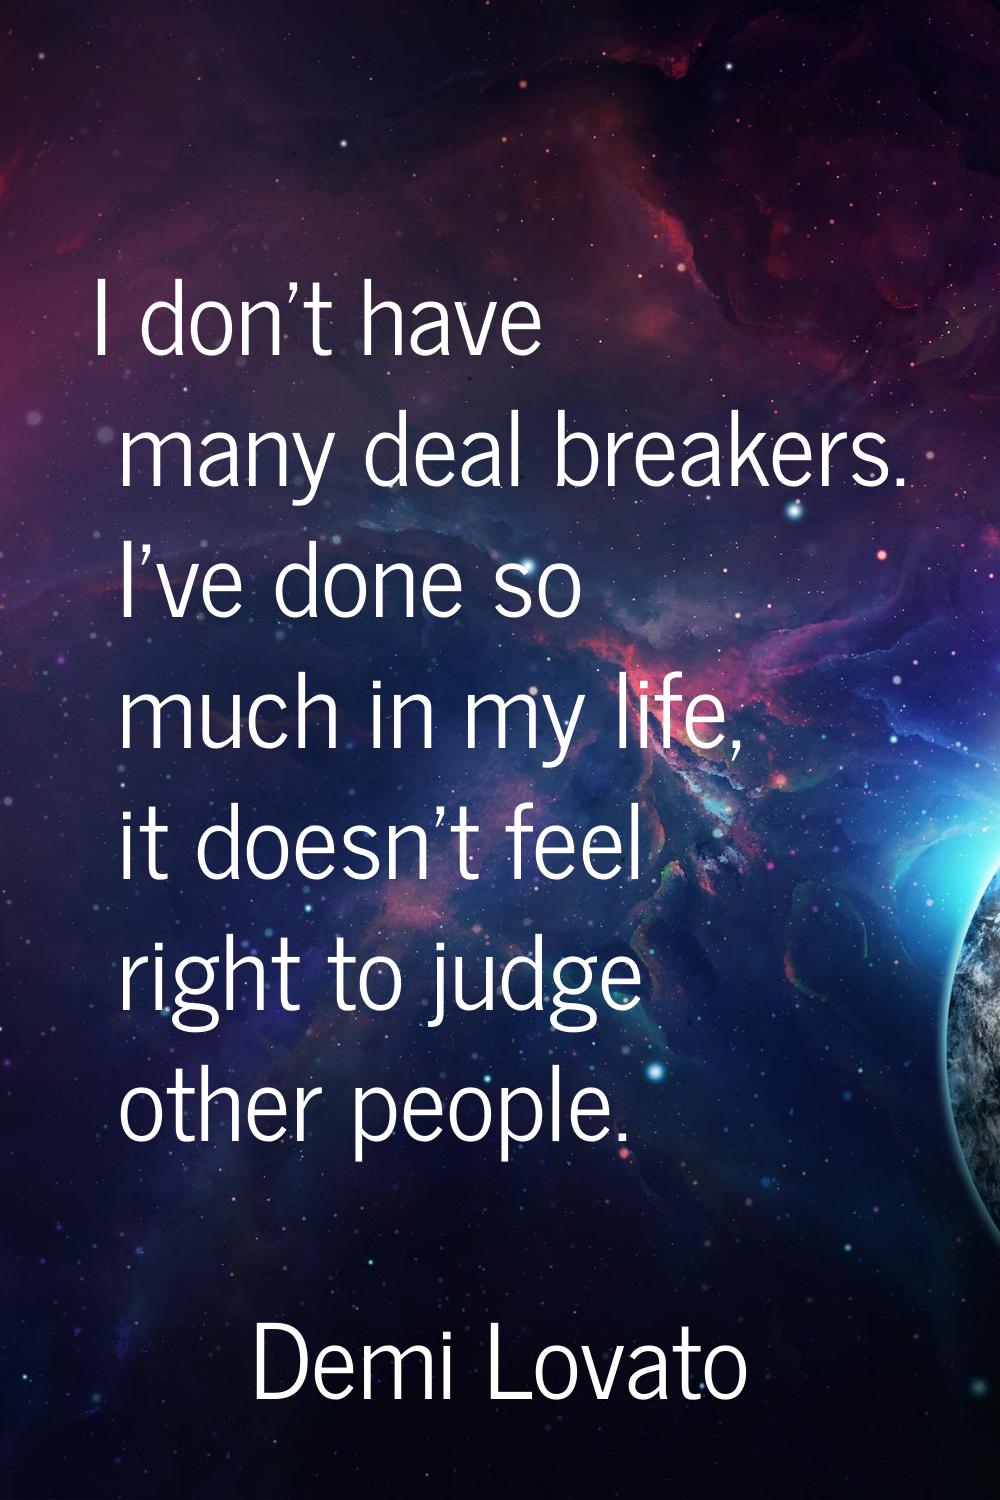 I don't have many deal breakers. I've done so much in my life, it doesn't feel right to judge other